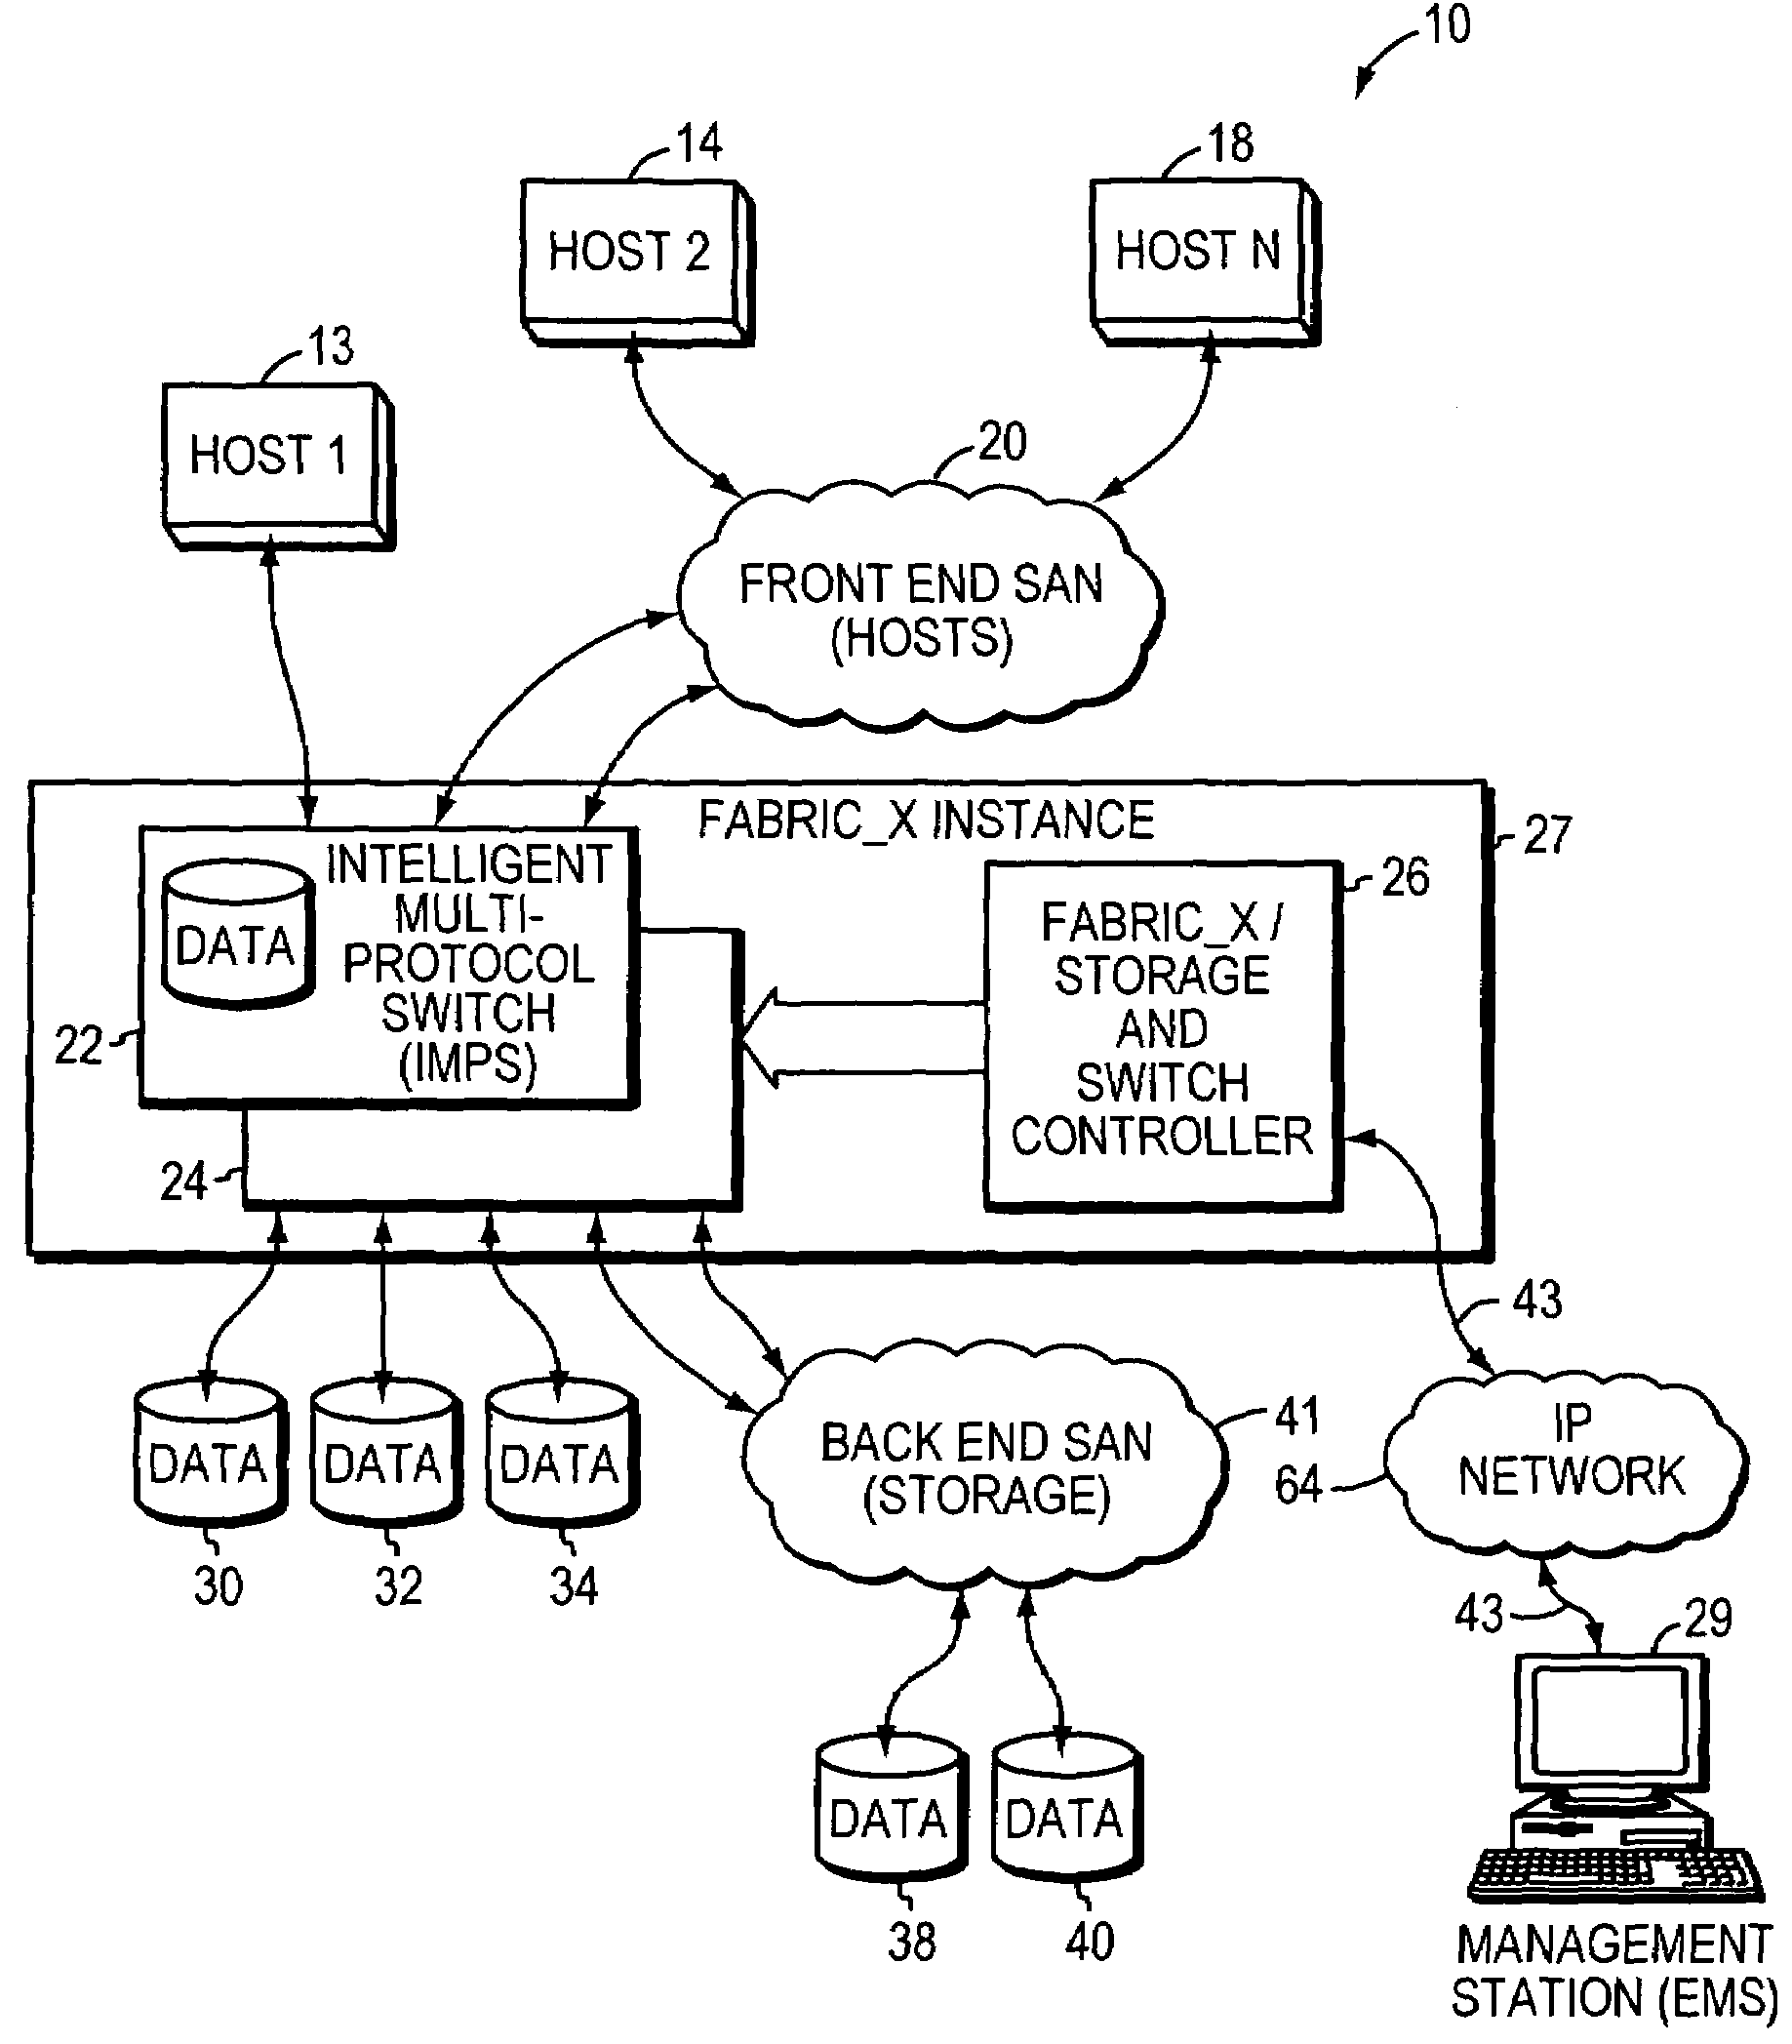 System and method for managing storage networks and providing virtualization of resources in such a network